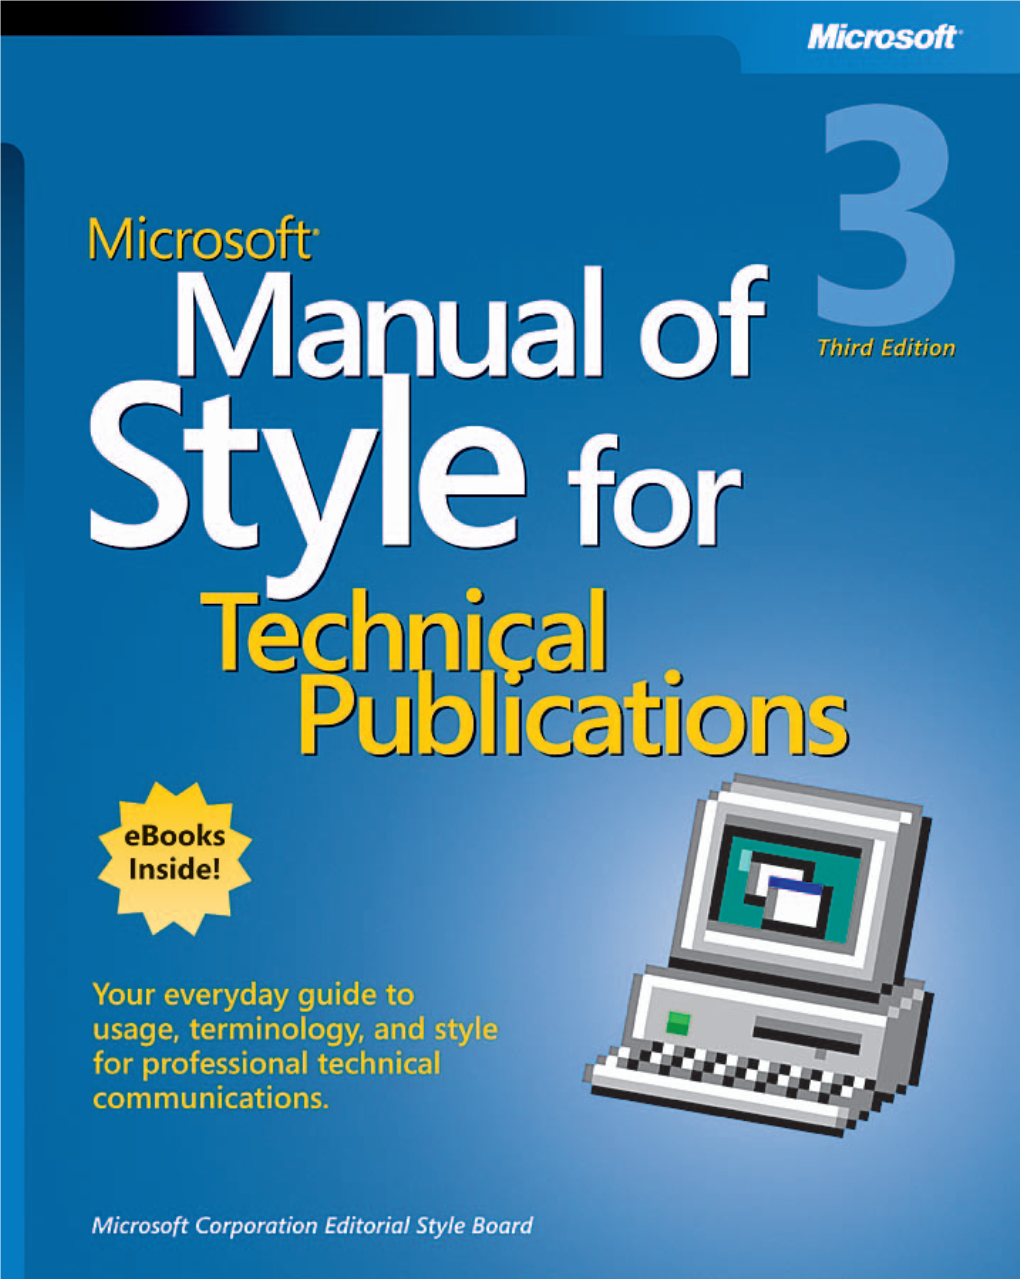 Microsoft Manual of Style for Technical Publications Third Edition Ebook